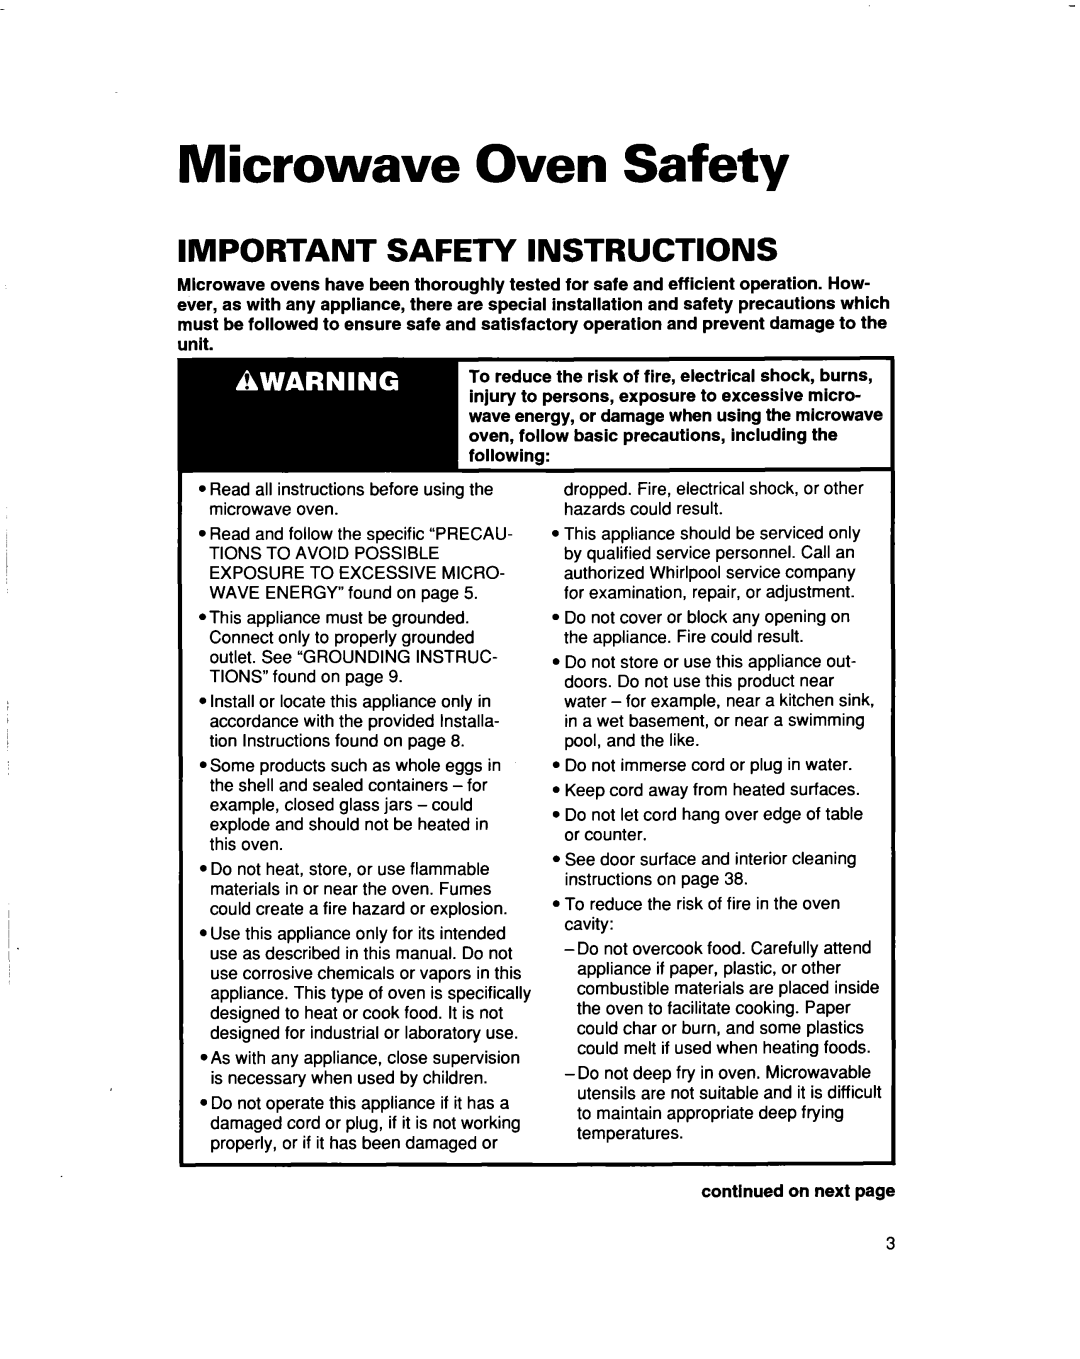 Whirlpool MT5120XAQ installation instructions Microwave Oven Safety, Important Safety Instructions, continued on next page 